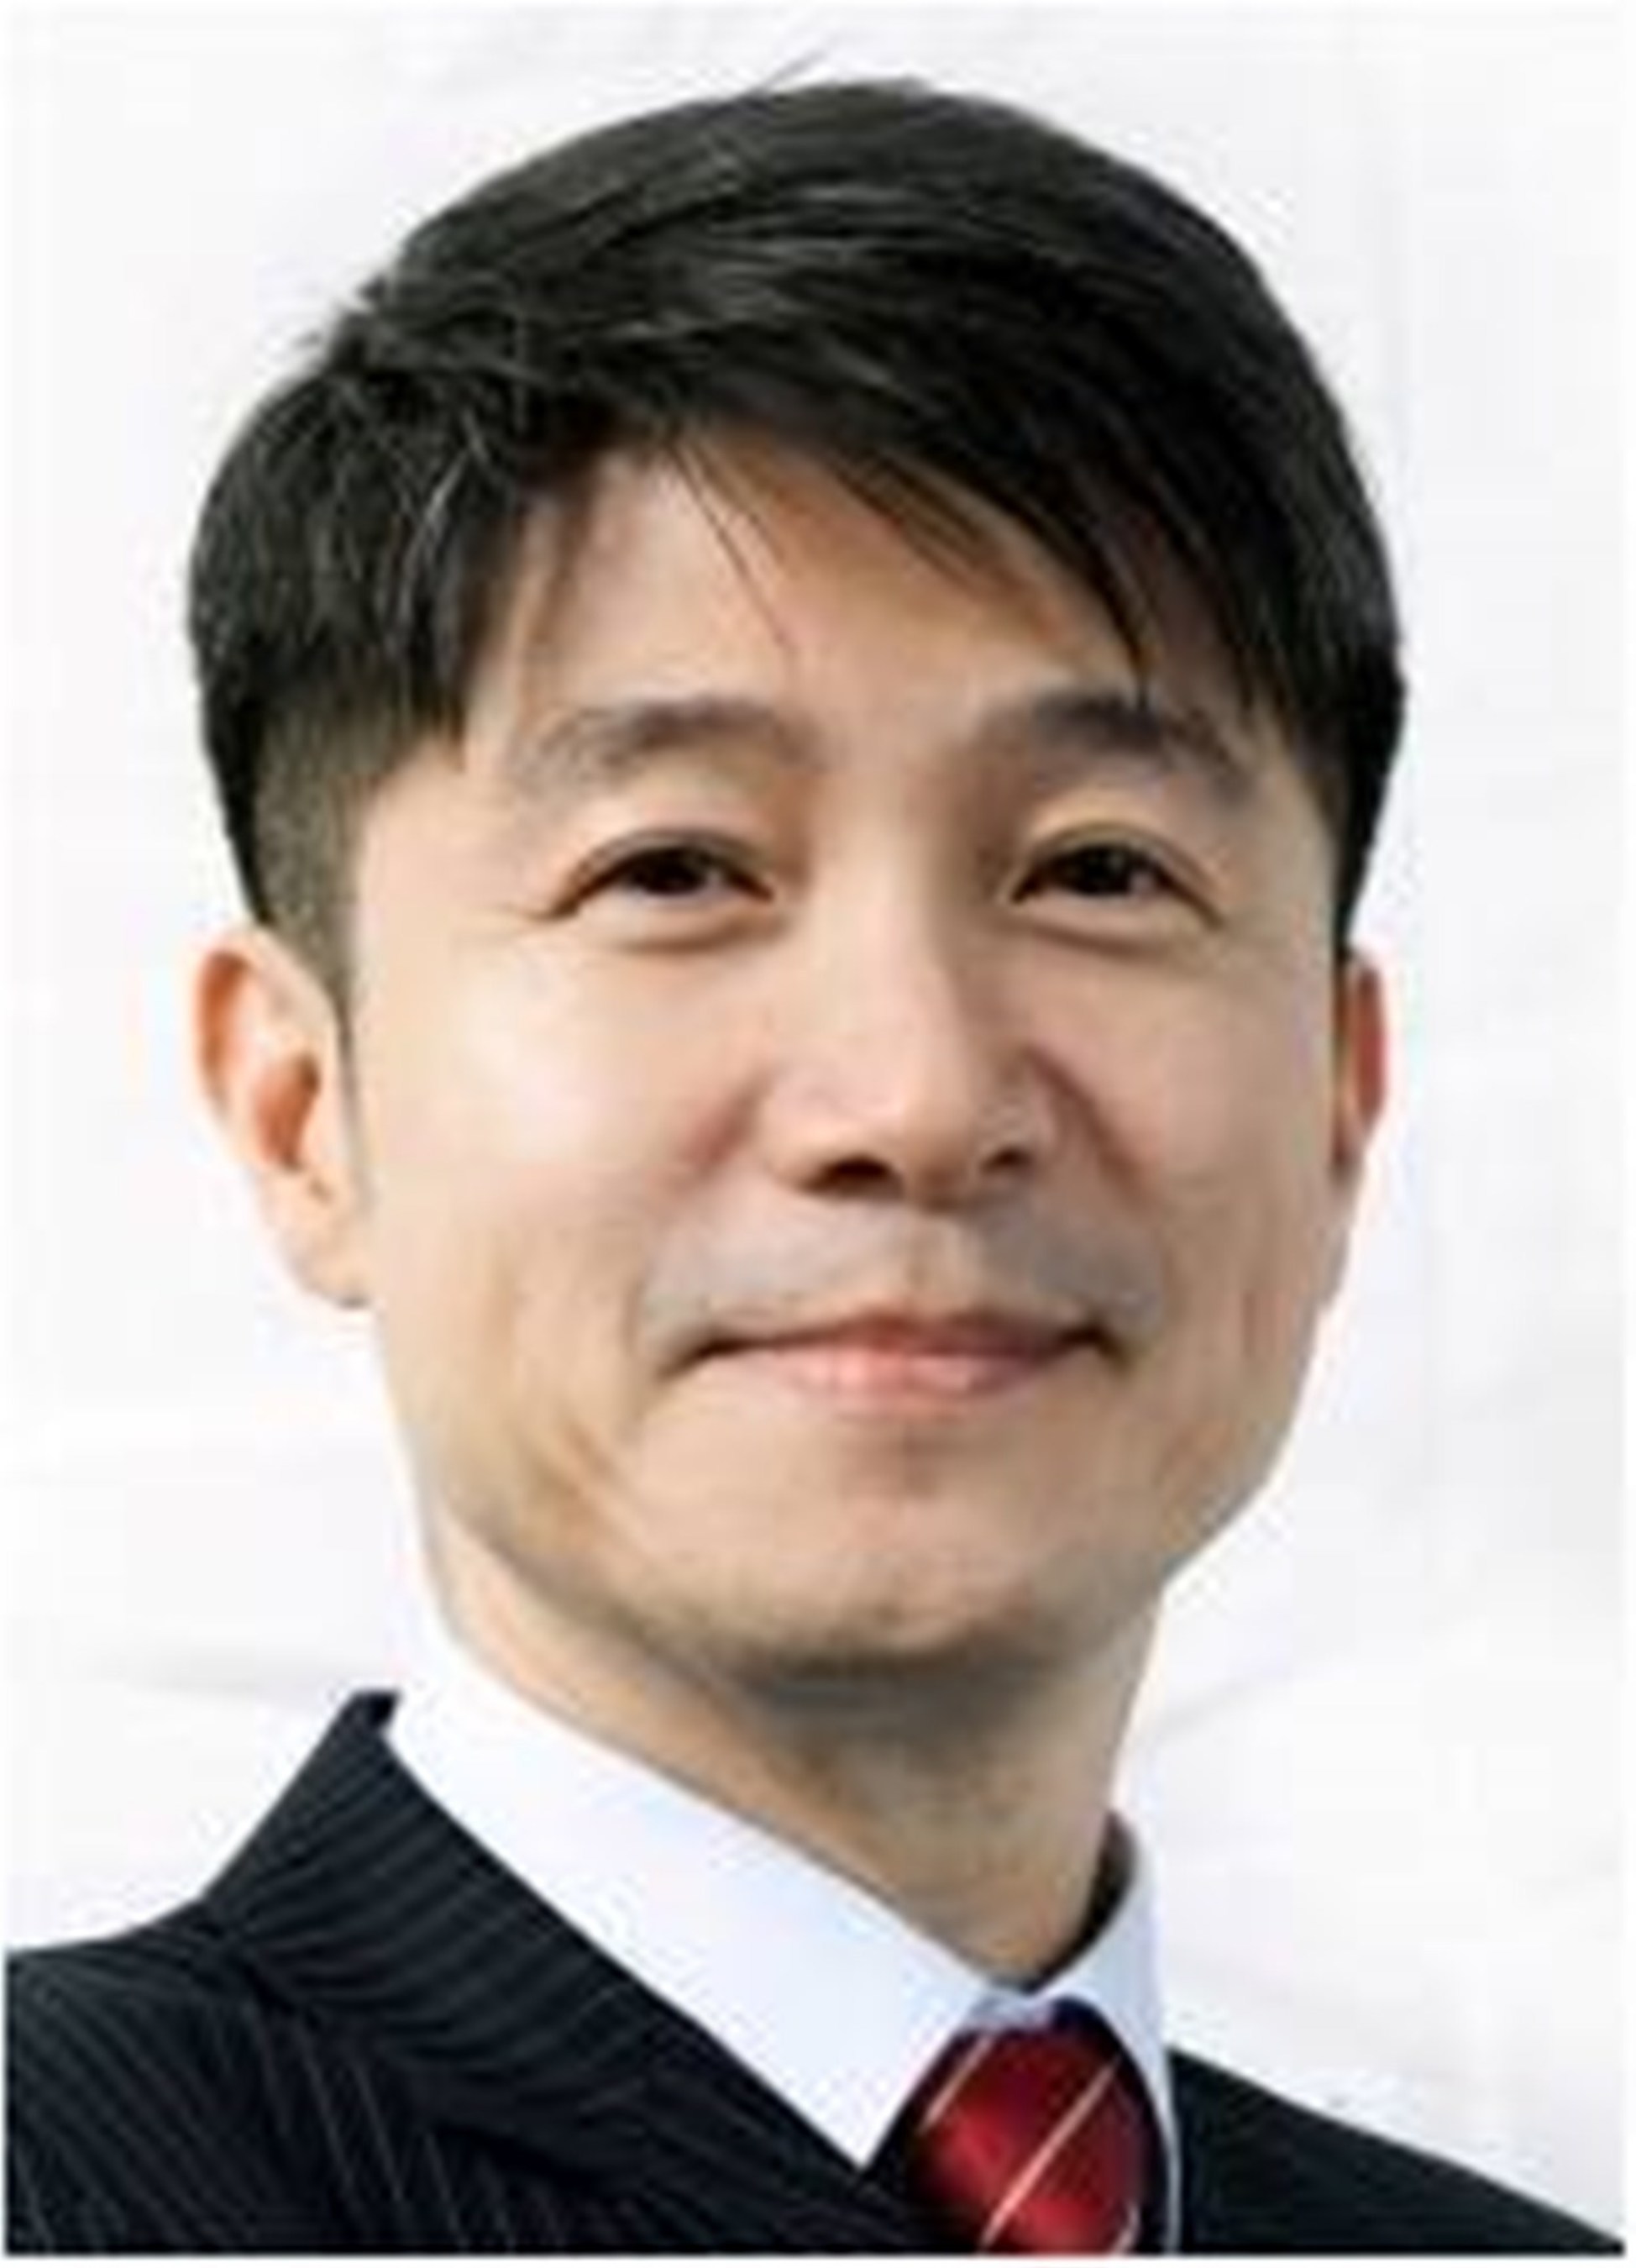 Juno Cho, President and CEO of LG Mobile Communications Company